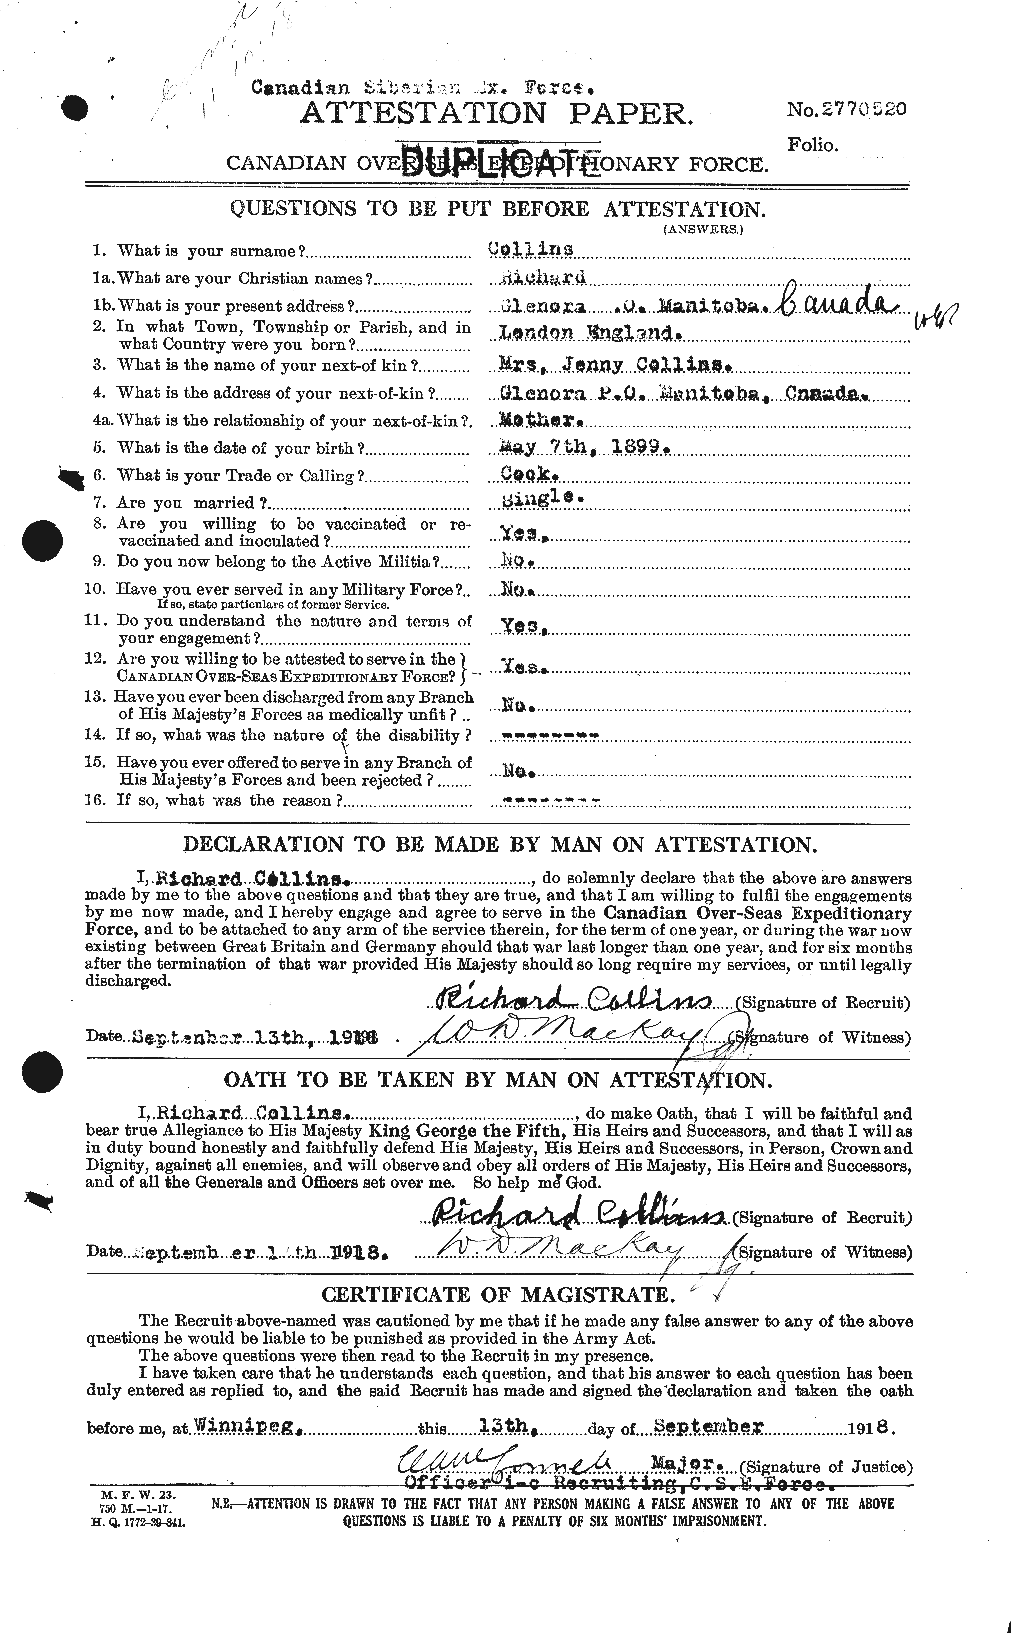 Personnel Records of the First World War - CEF 069284a